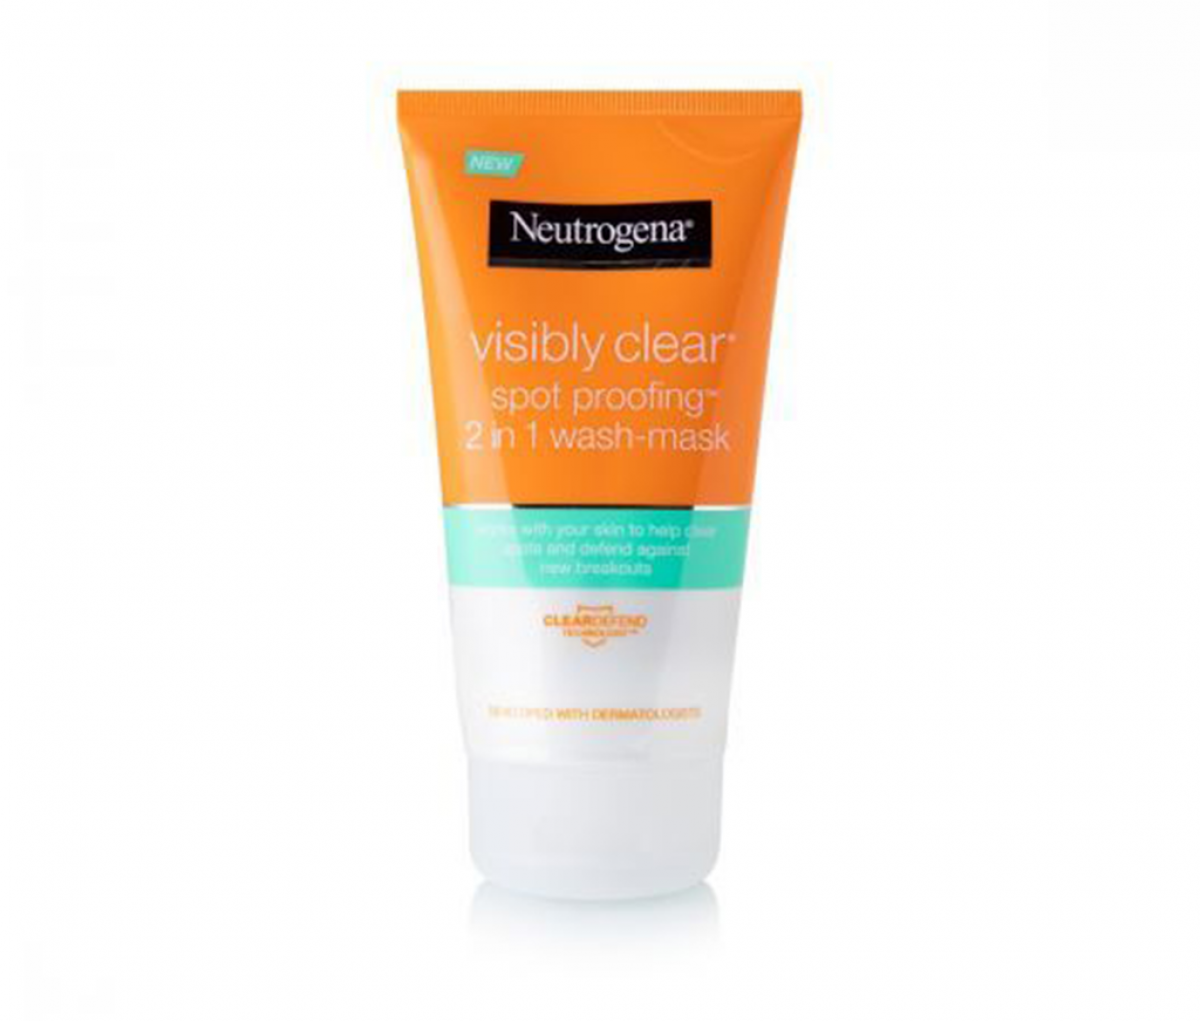 Neutrogena  Visibly Clear Spot Proofing 2in1